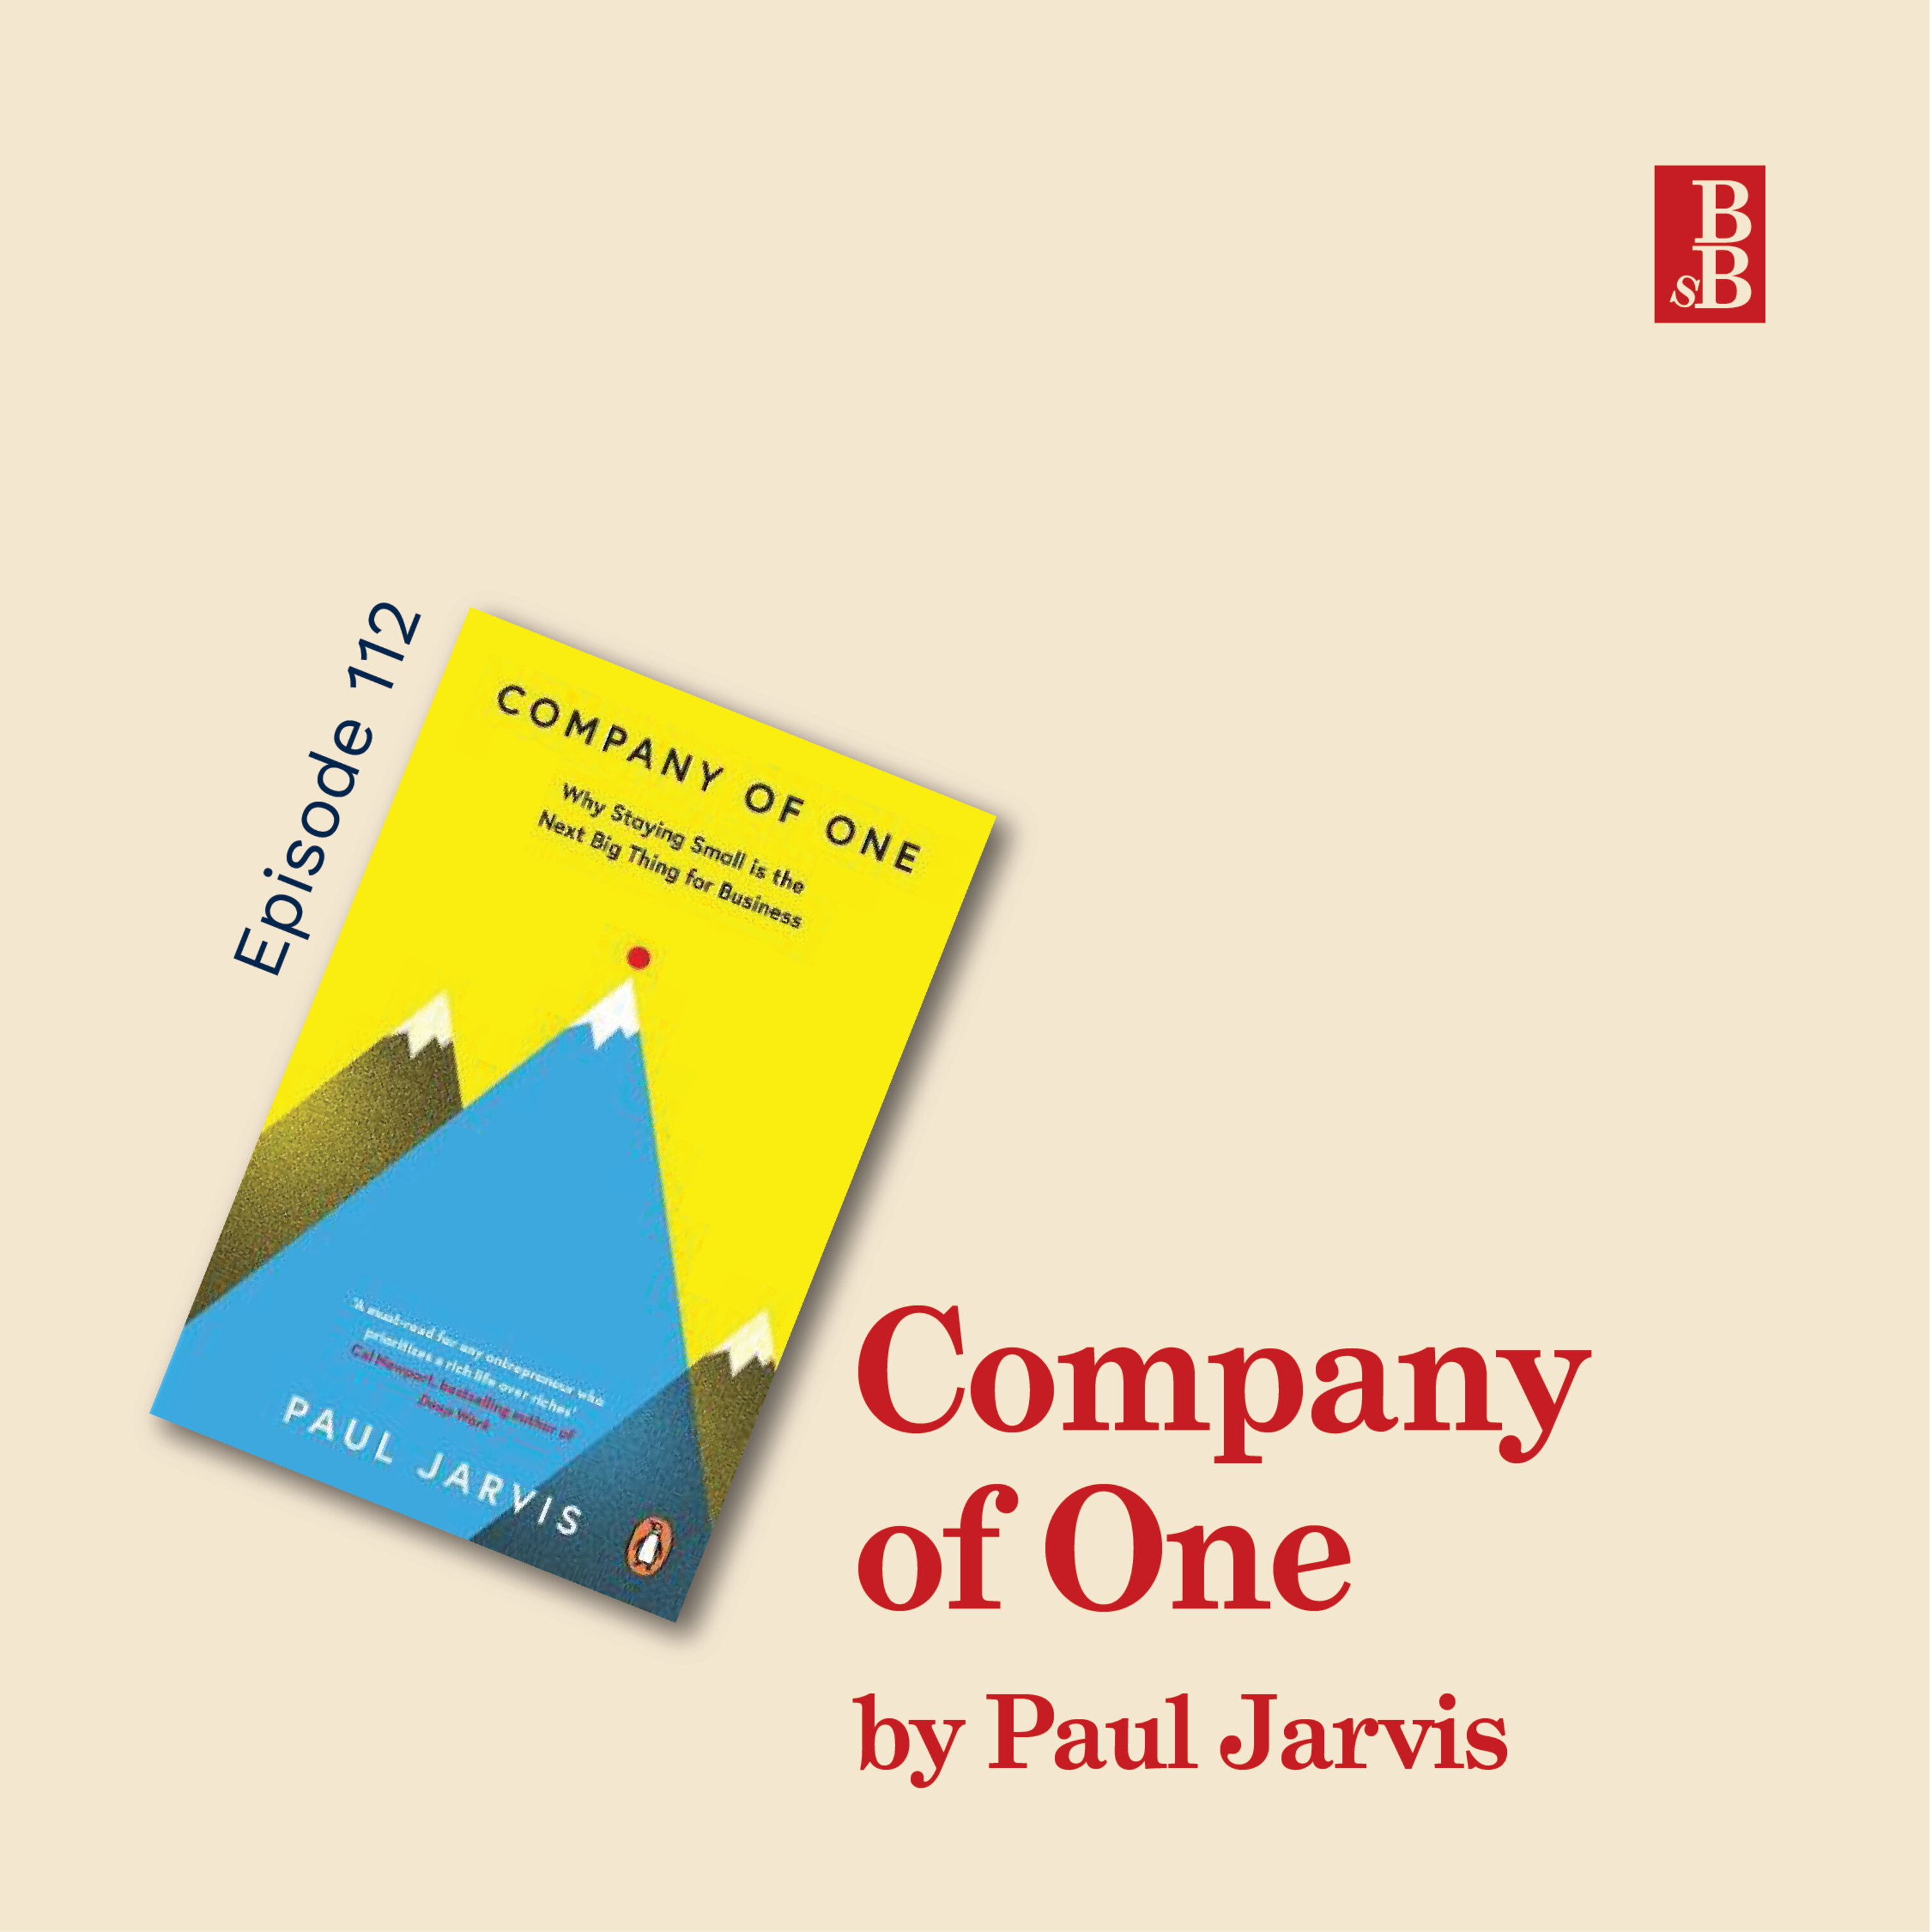 Company of One by Paul Jarvis: why you need to be better, not bigger